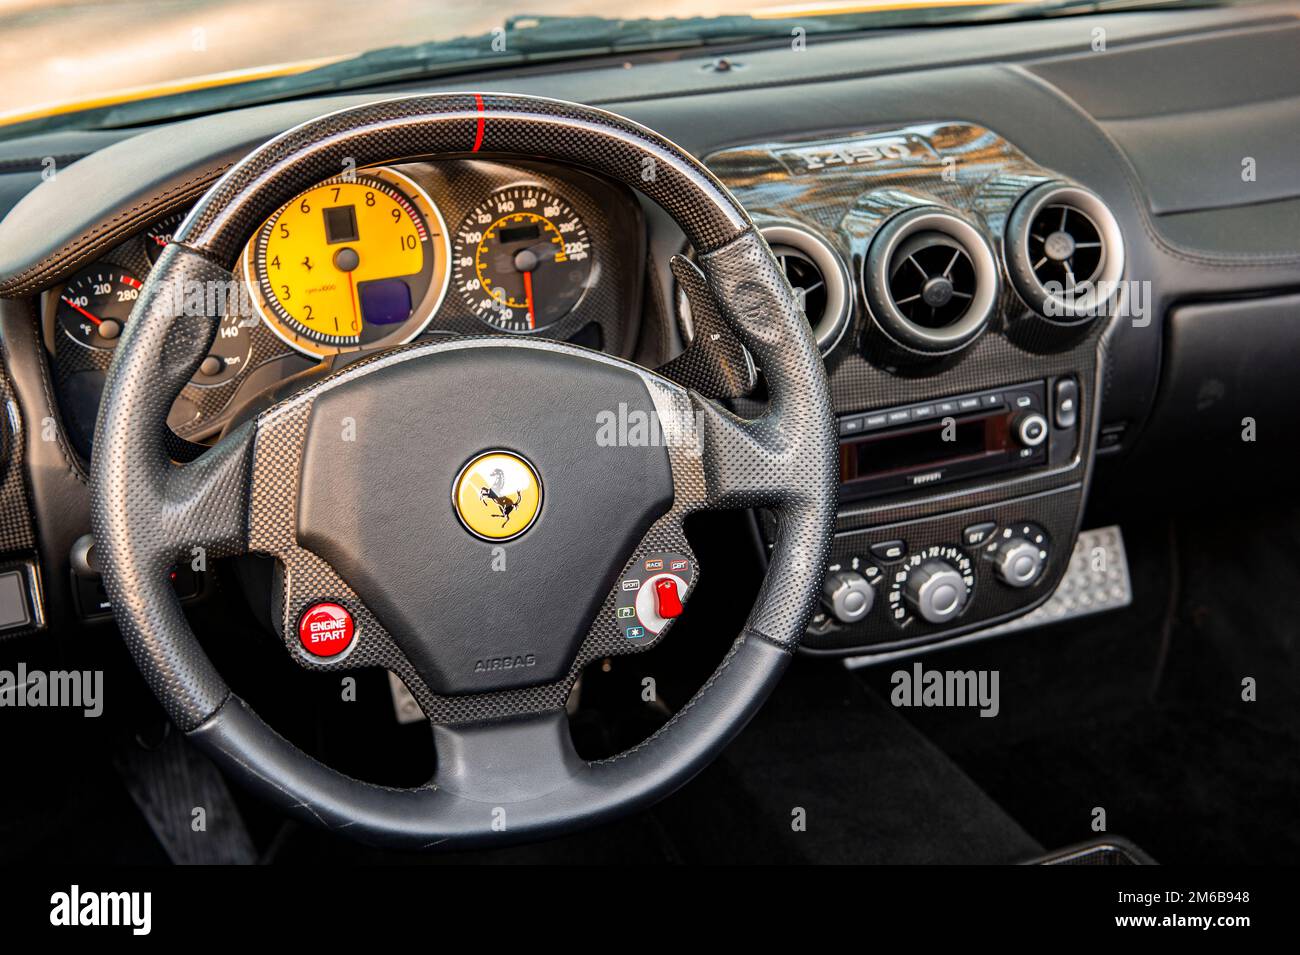 Interior view of the cockpit of the supercar Ferrari F430 Spyder sports car. Stock Photo